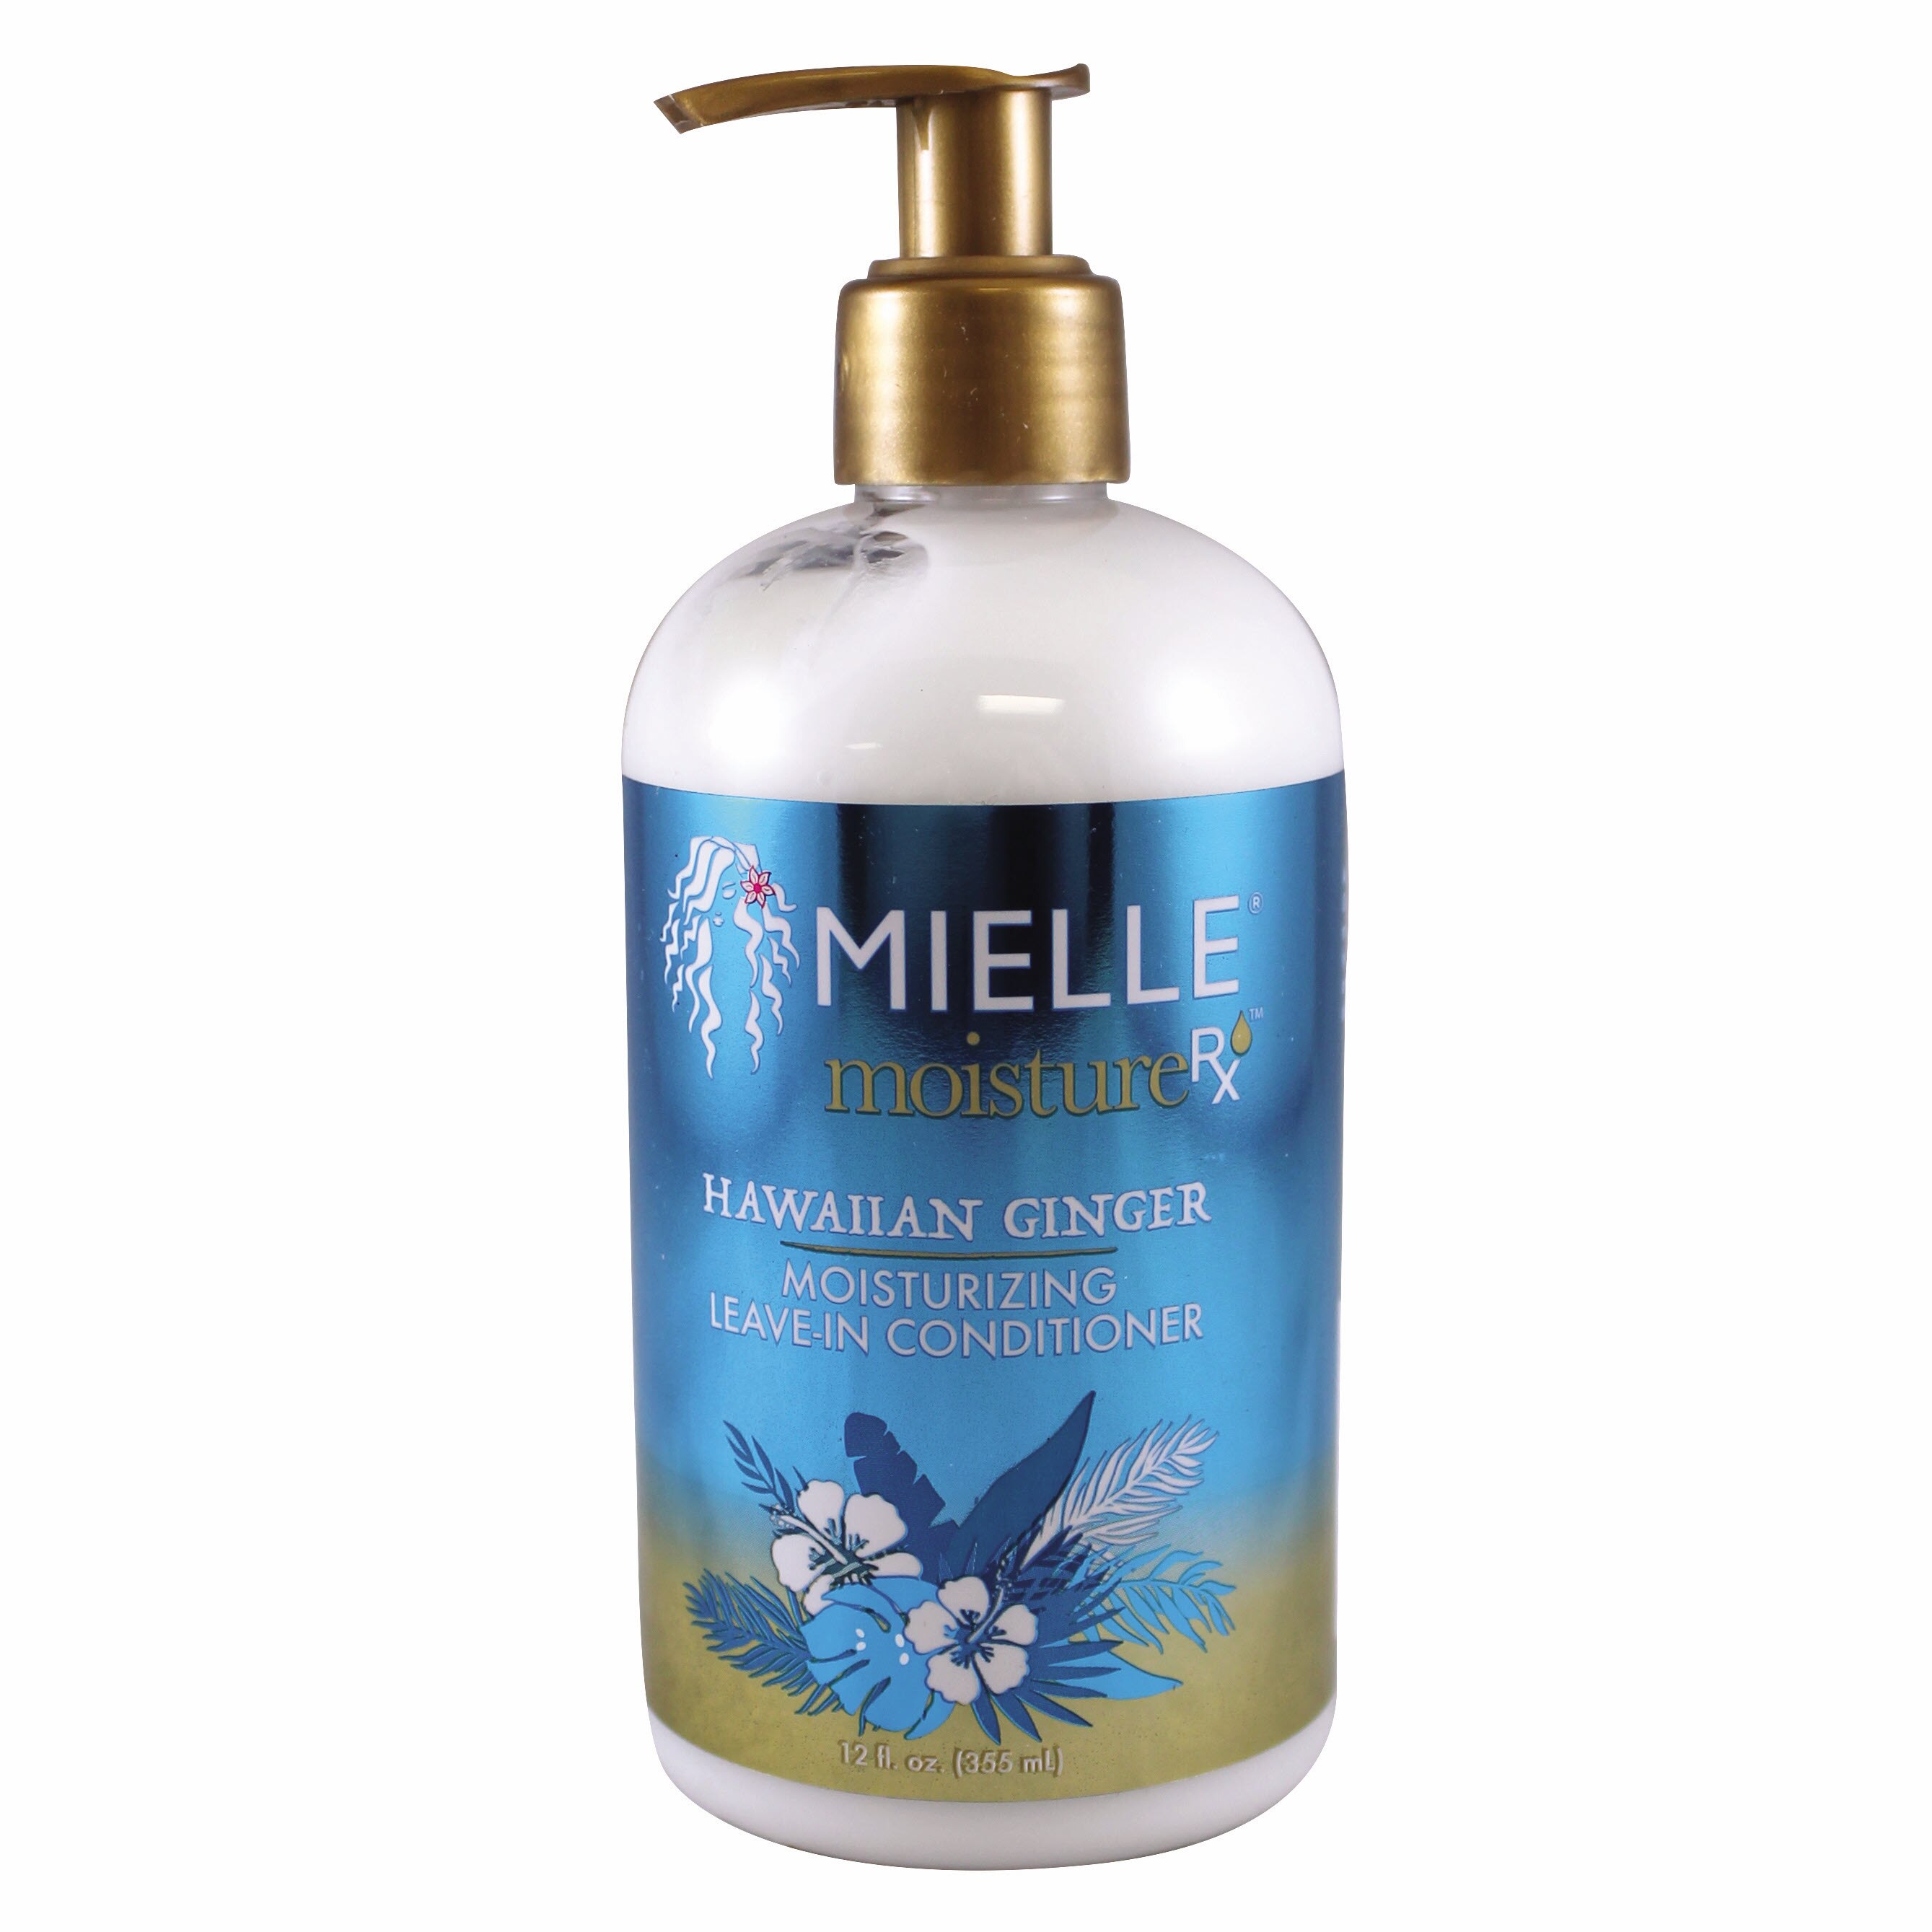 Mielle Moisture Rx Hawaiian Ginger Leave-In Conditioner, 12 OZ